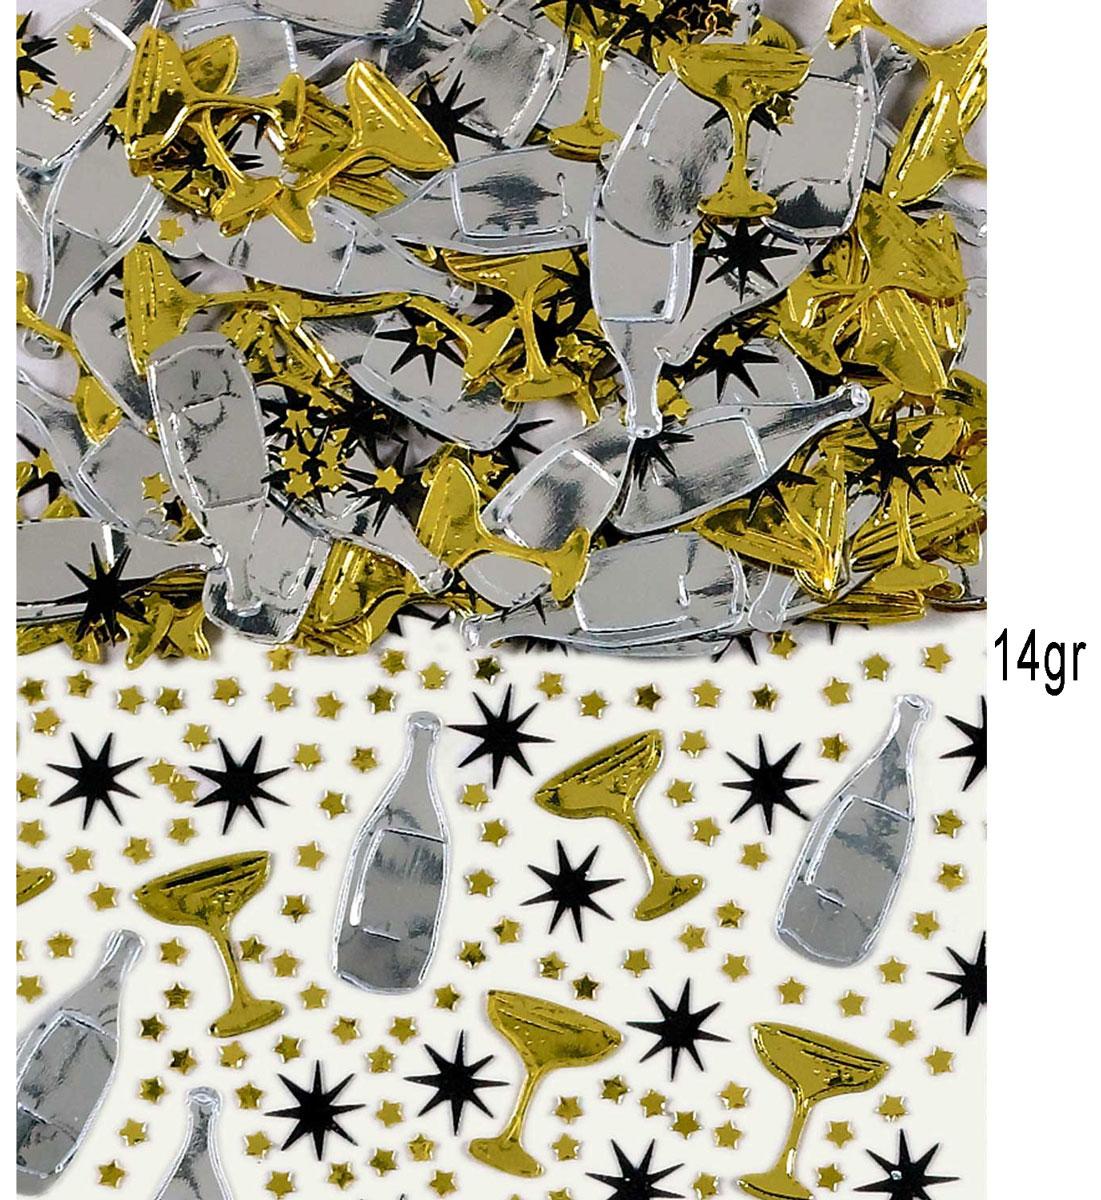 14gr pack of Champagne Celebration Confetti Mix by Amscan 9900847 available here at Karnival Costumes online party shop